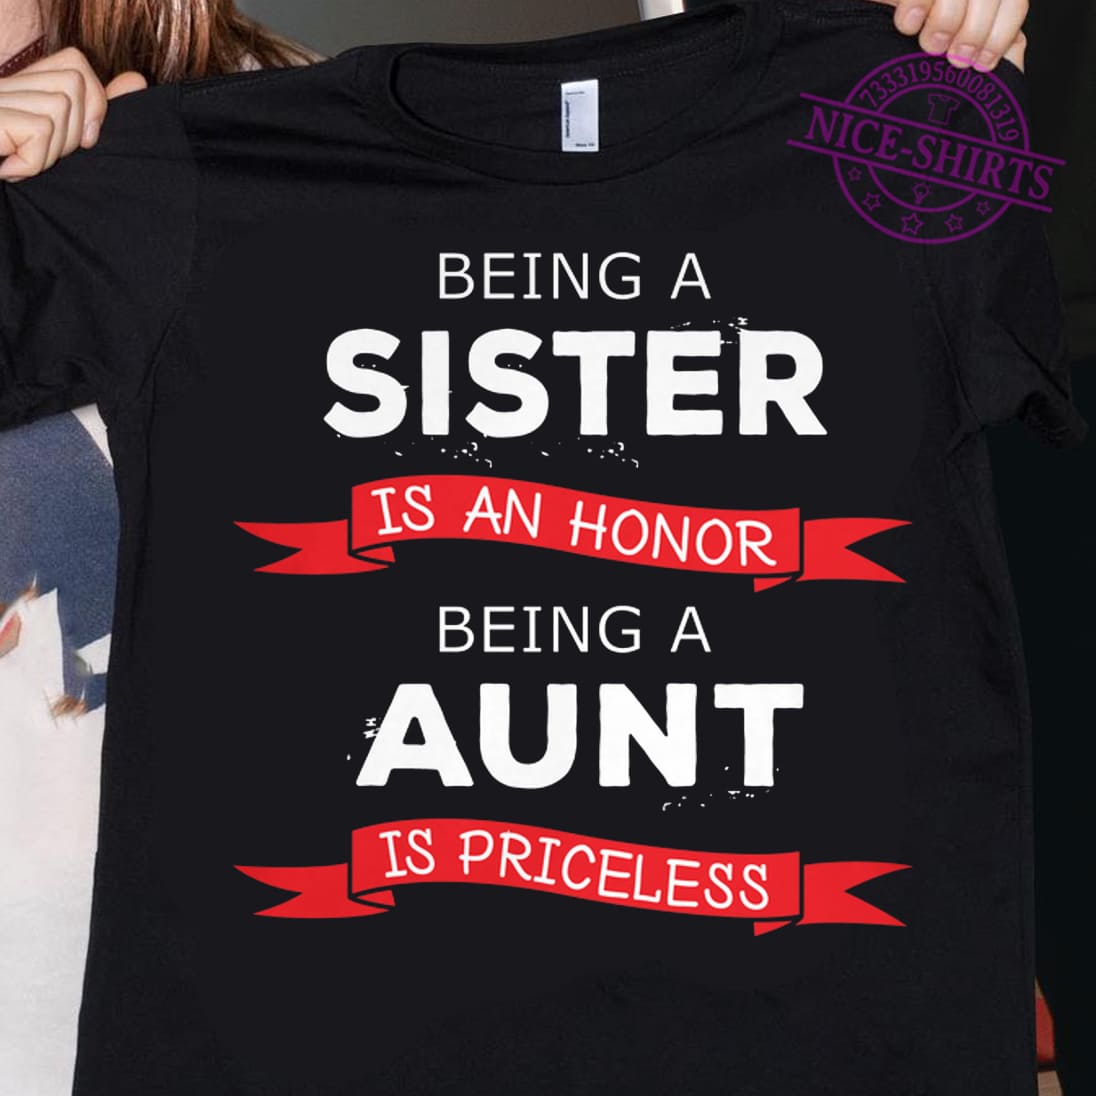 Being a sister is an honor being a aunt is priceless - Sister and aunt titleBeing a sister is an honor being a aunt is priceless - Sister and aunt title